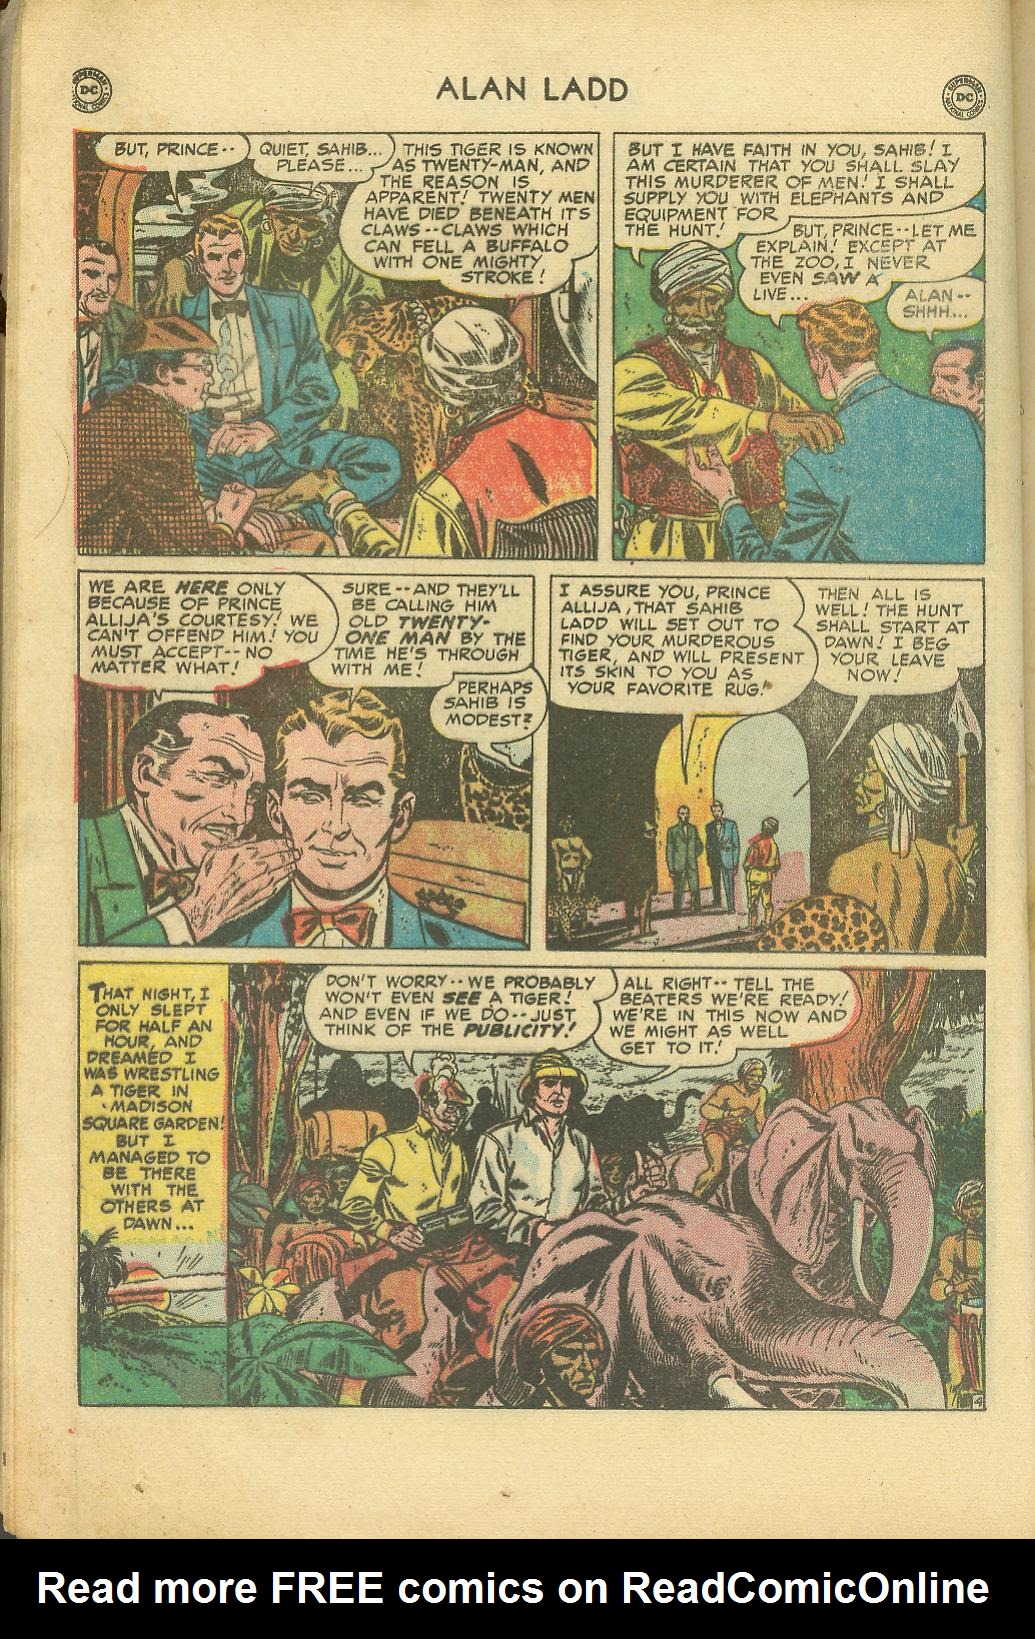 Read online Adventures of Alan Ladd comic -  Issue #7 - 18